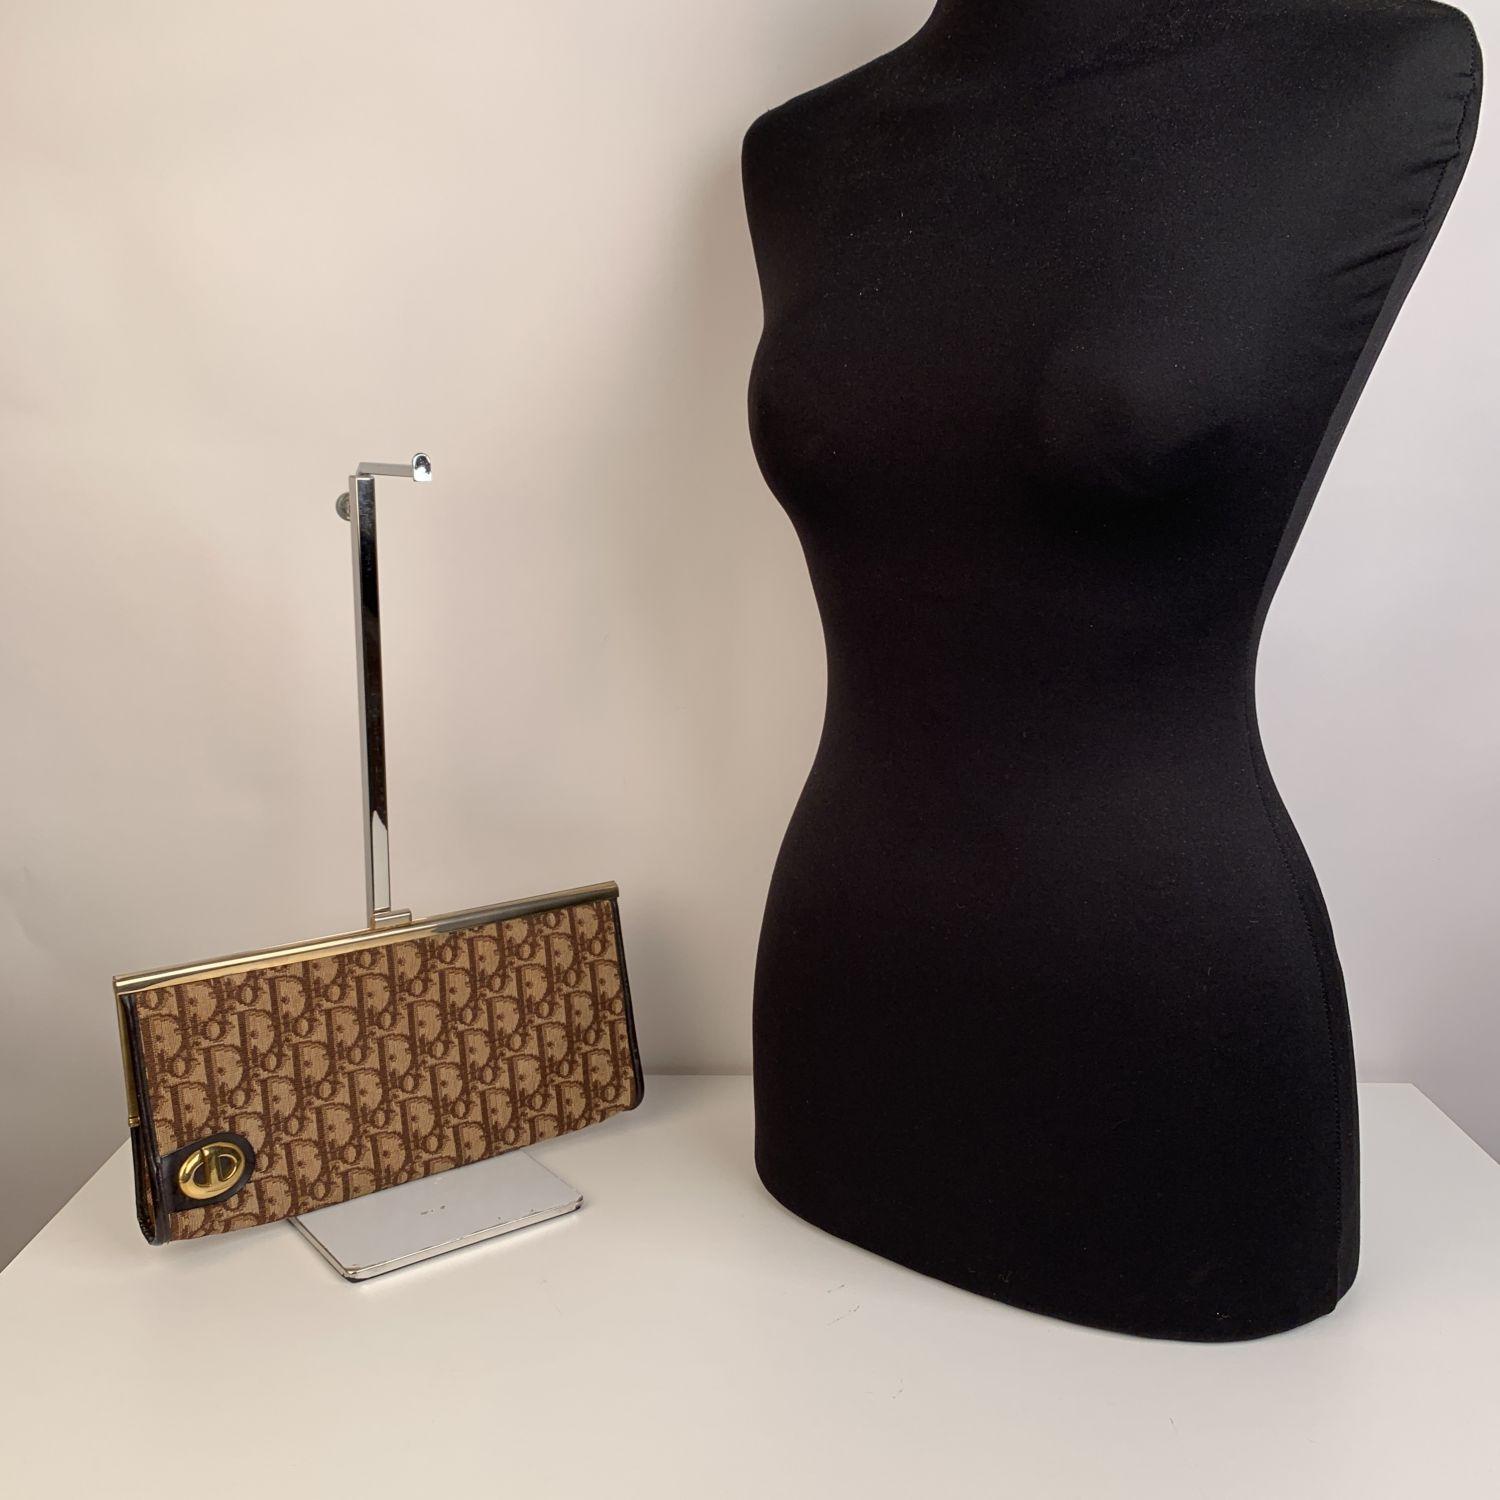 Vintage CHRISTIAN DIOR Brown 'Diorissimo' tapestry monogram canvas. Gold metal frame. Clasp closure on top. Brown leather lining. 'Christian Dior - made in France' embossed inside.

Details

MATERIAL: Canvas

COLOR: Brown

MODEL: -

GENDER: